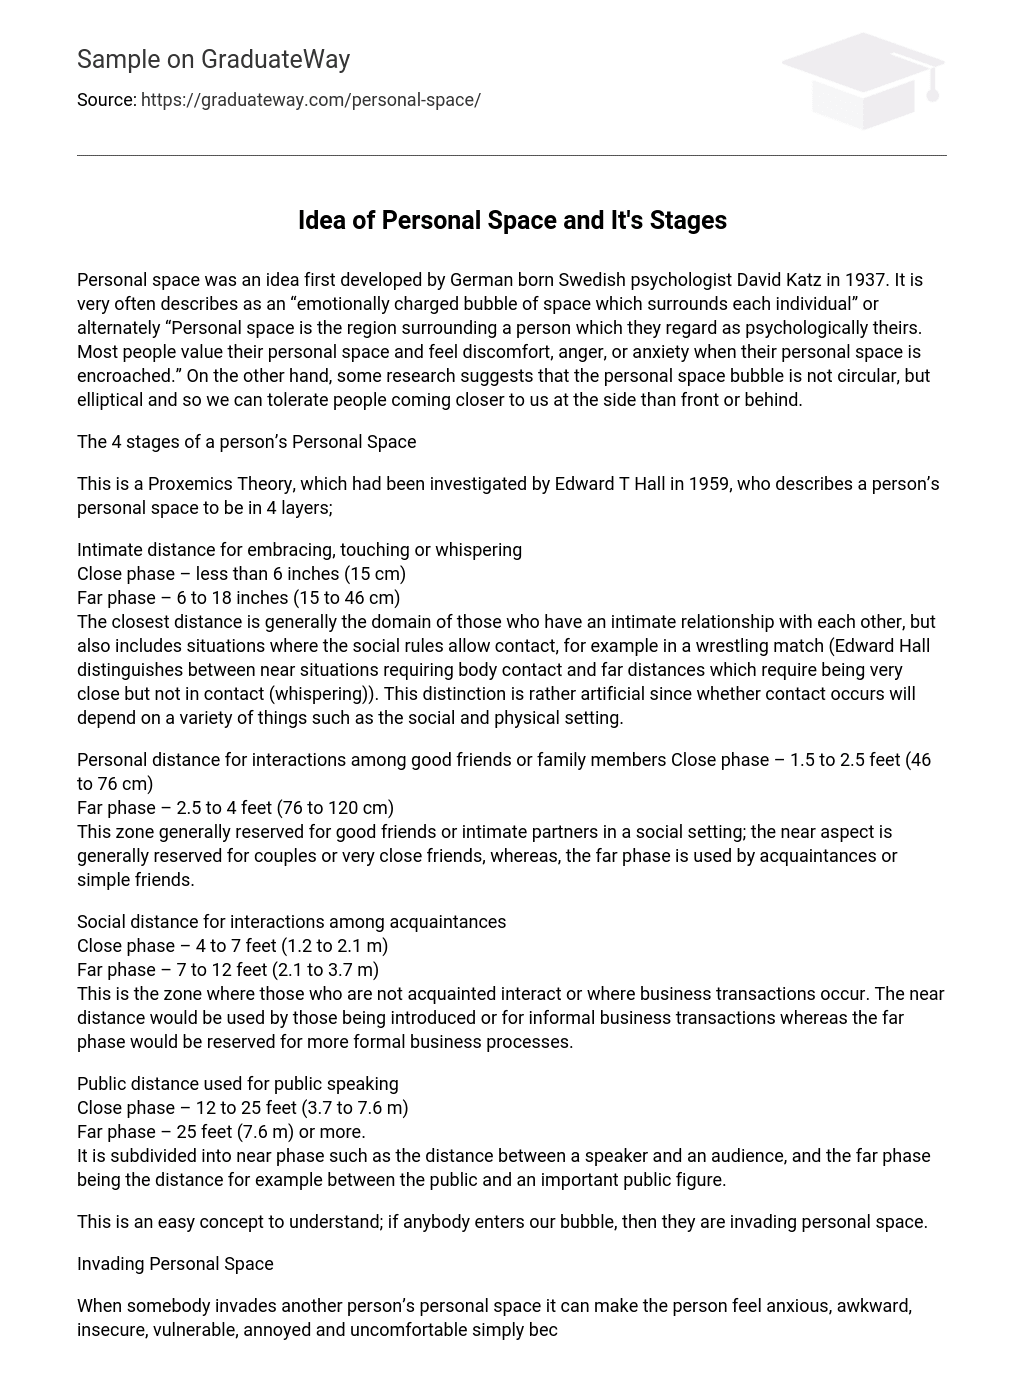 Idea of Personal Space and It’s Stages